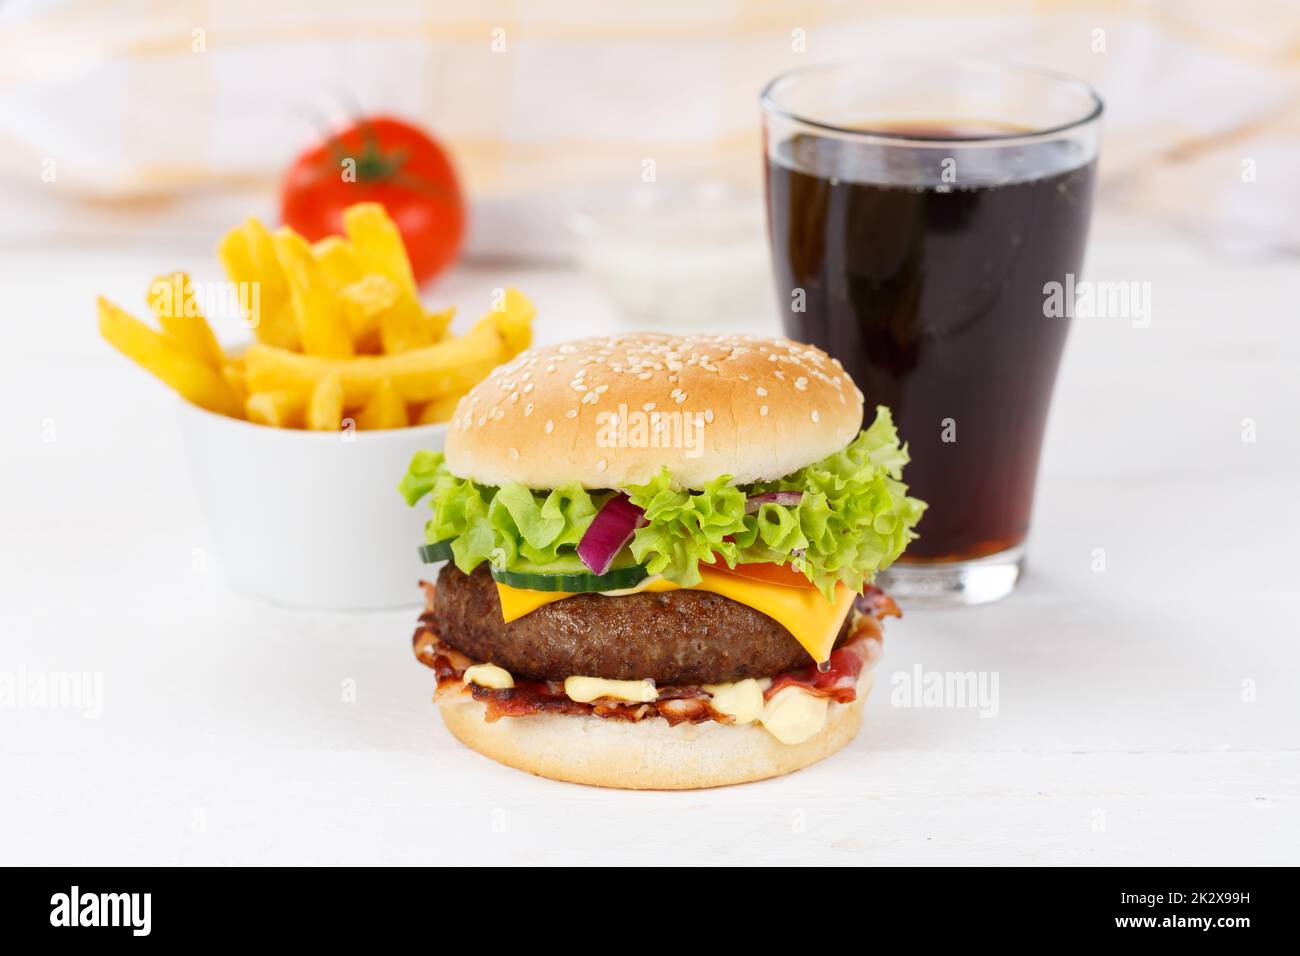 Hamburger Cheeseburger meal fastfood fast food with cola drink and French Fries on a wooden board Stock Photo